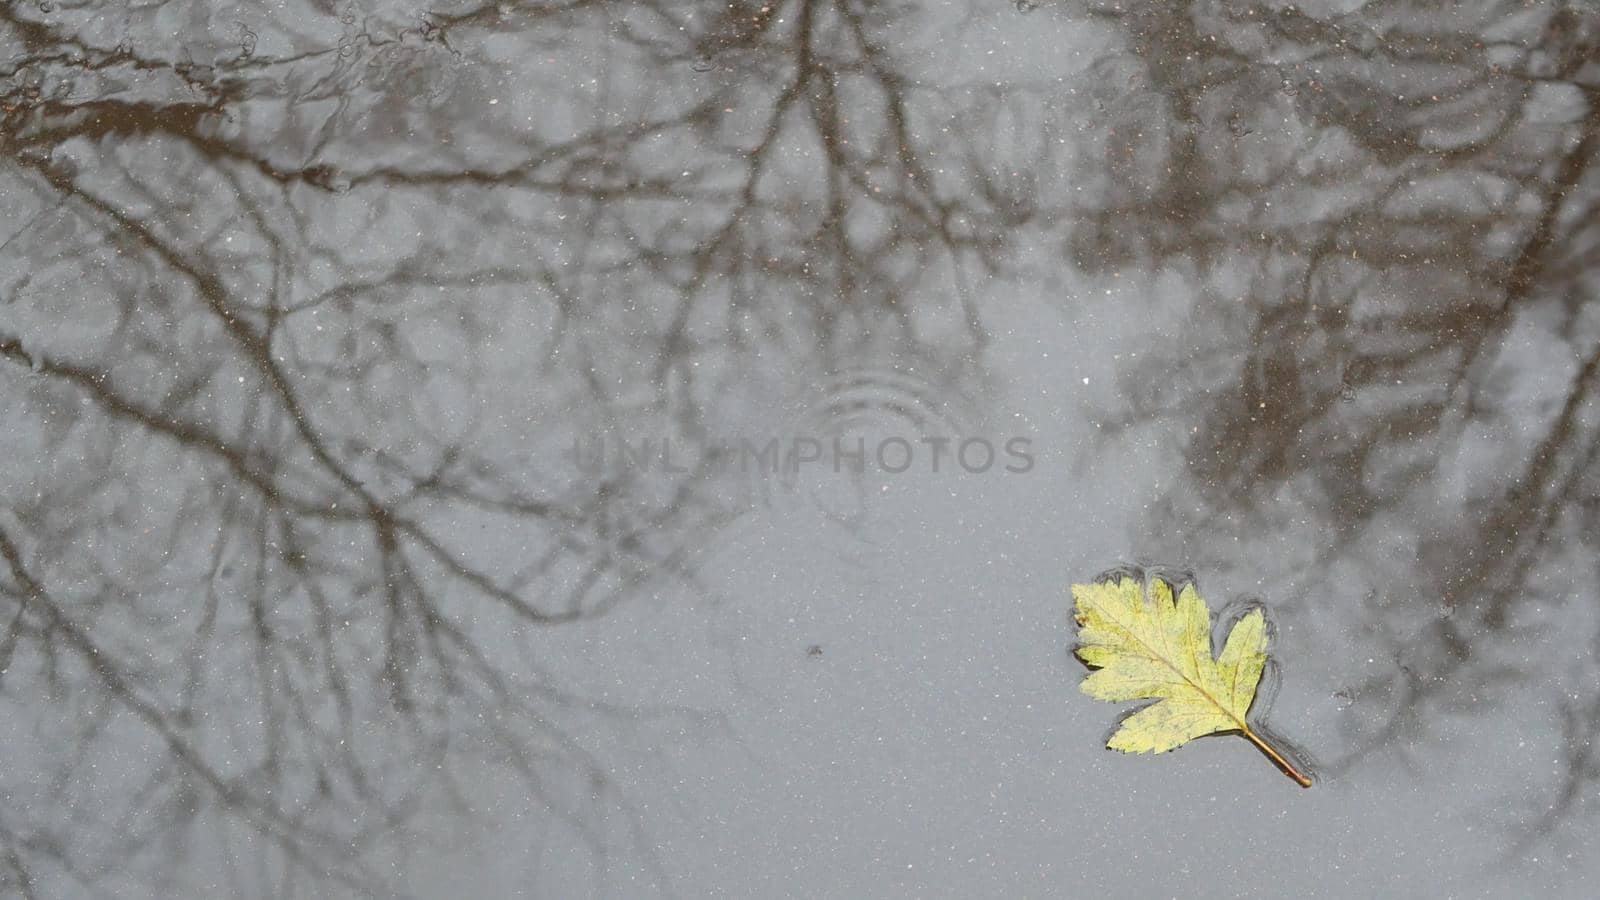 Yellow autumn fallen oak leaves, puddle on grey asphalt. Fall bare leafless tree branches reflection in water. Wet leaf and rain drops close up, waves ripple from raindrop. Gloomy melancholic weather.